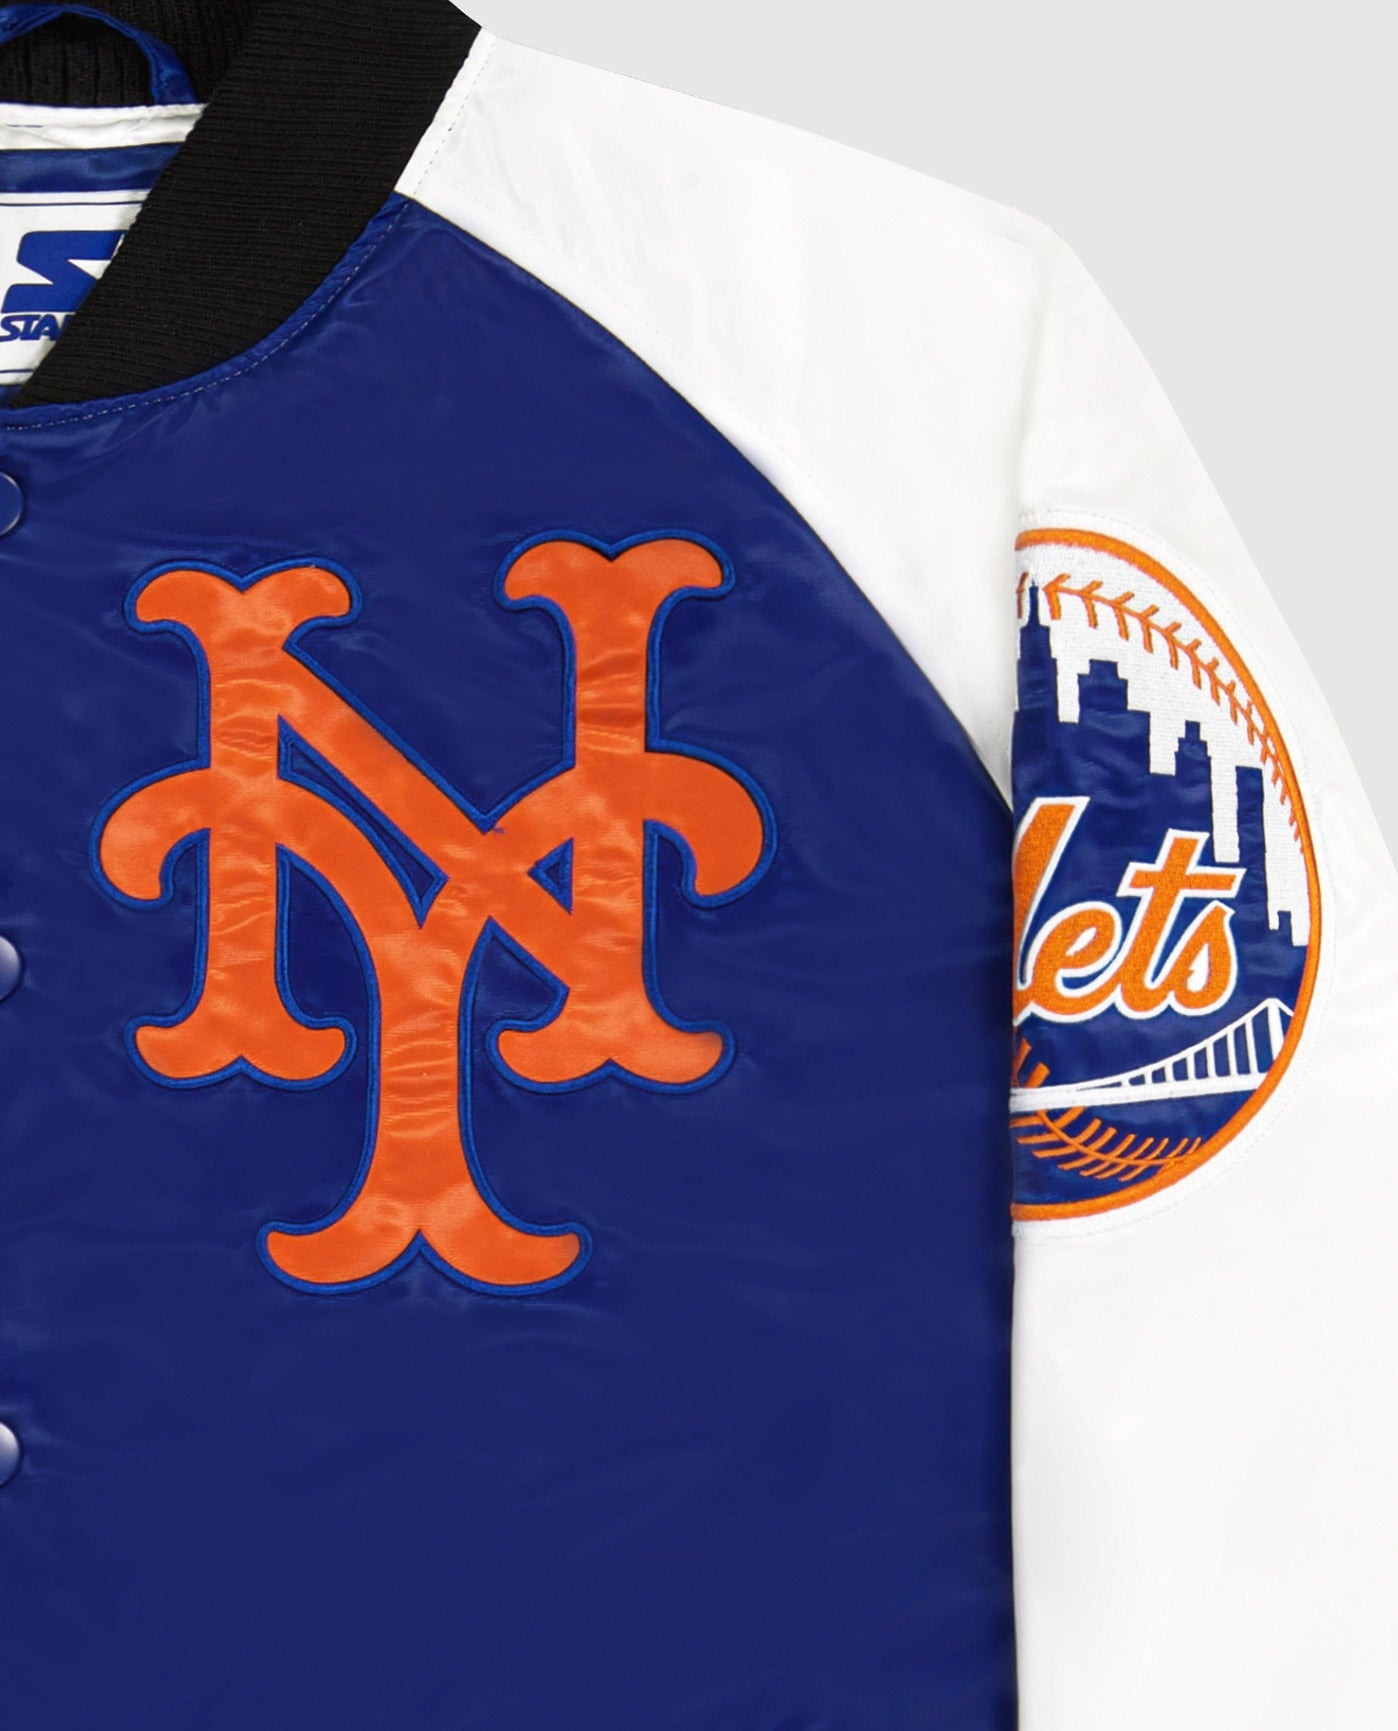 NY logo on top left chest and Mets logo on the sleeves | Mets Blue